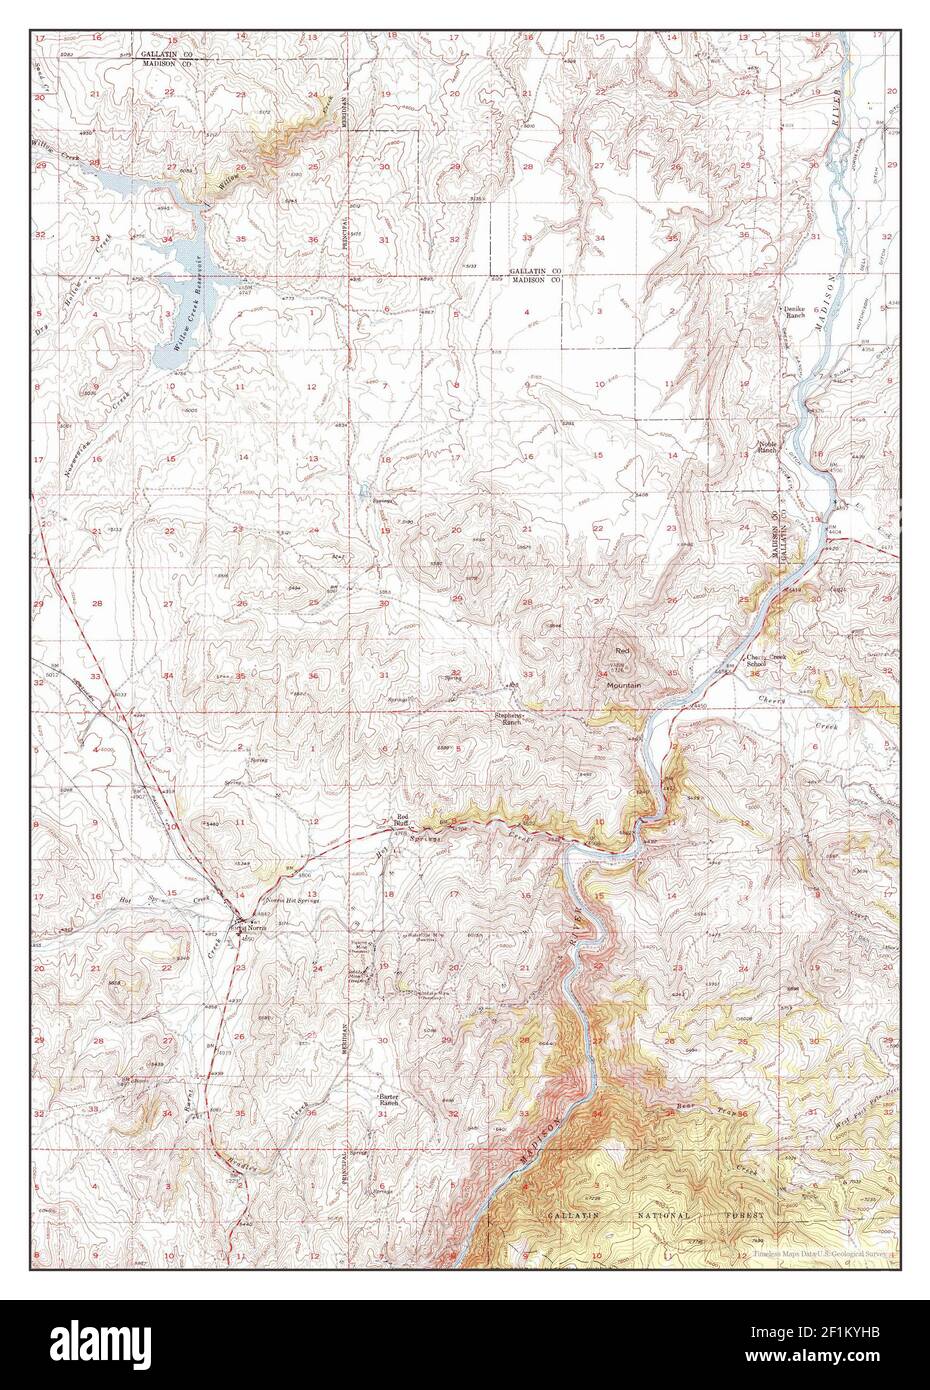 Norris, Montana, map 1949, 1:62500, United States of America by Timeless Maps, data U.S. Geological Survey Stock Photo